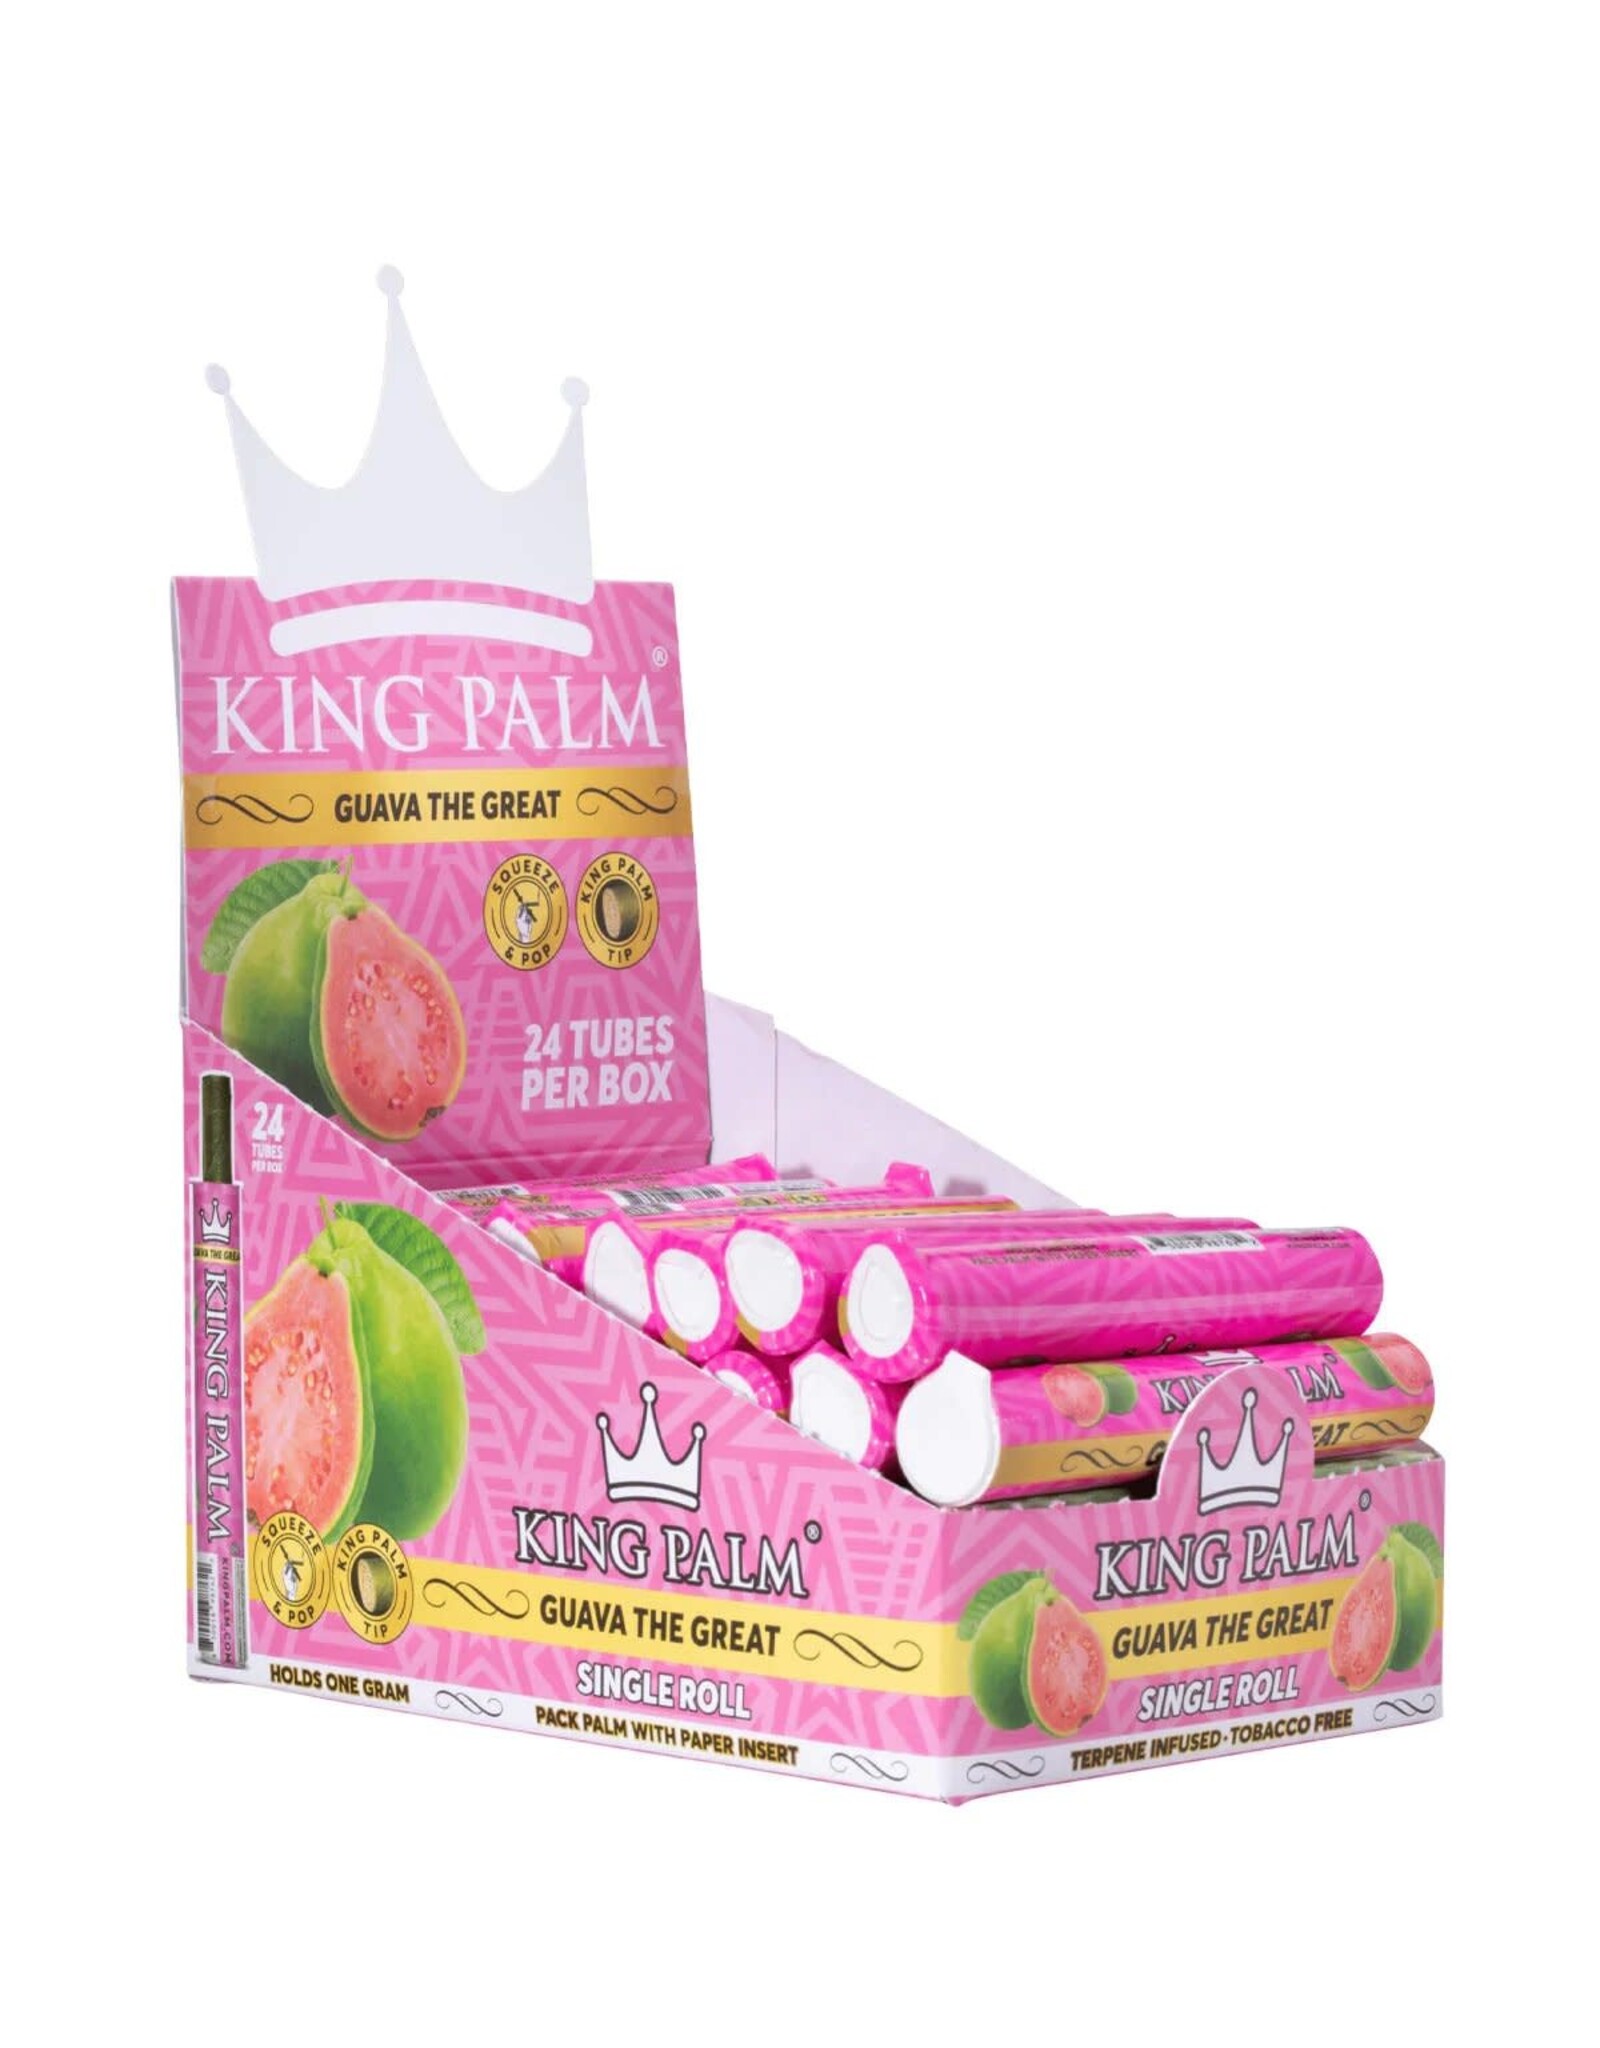 King Palm King Palm Cones Mini 1pk - Guava The Great  24ct Box